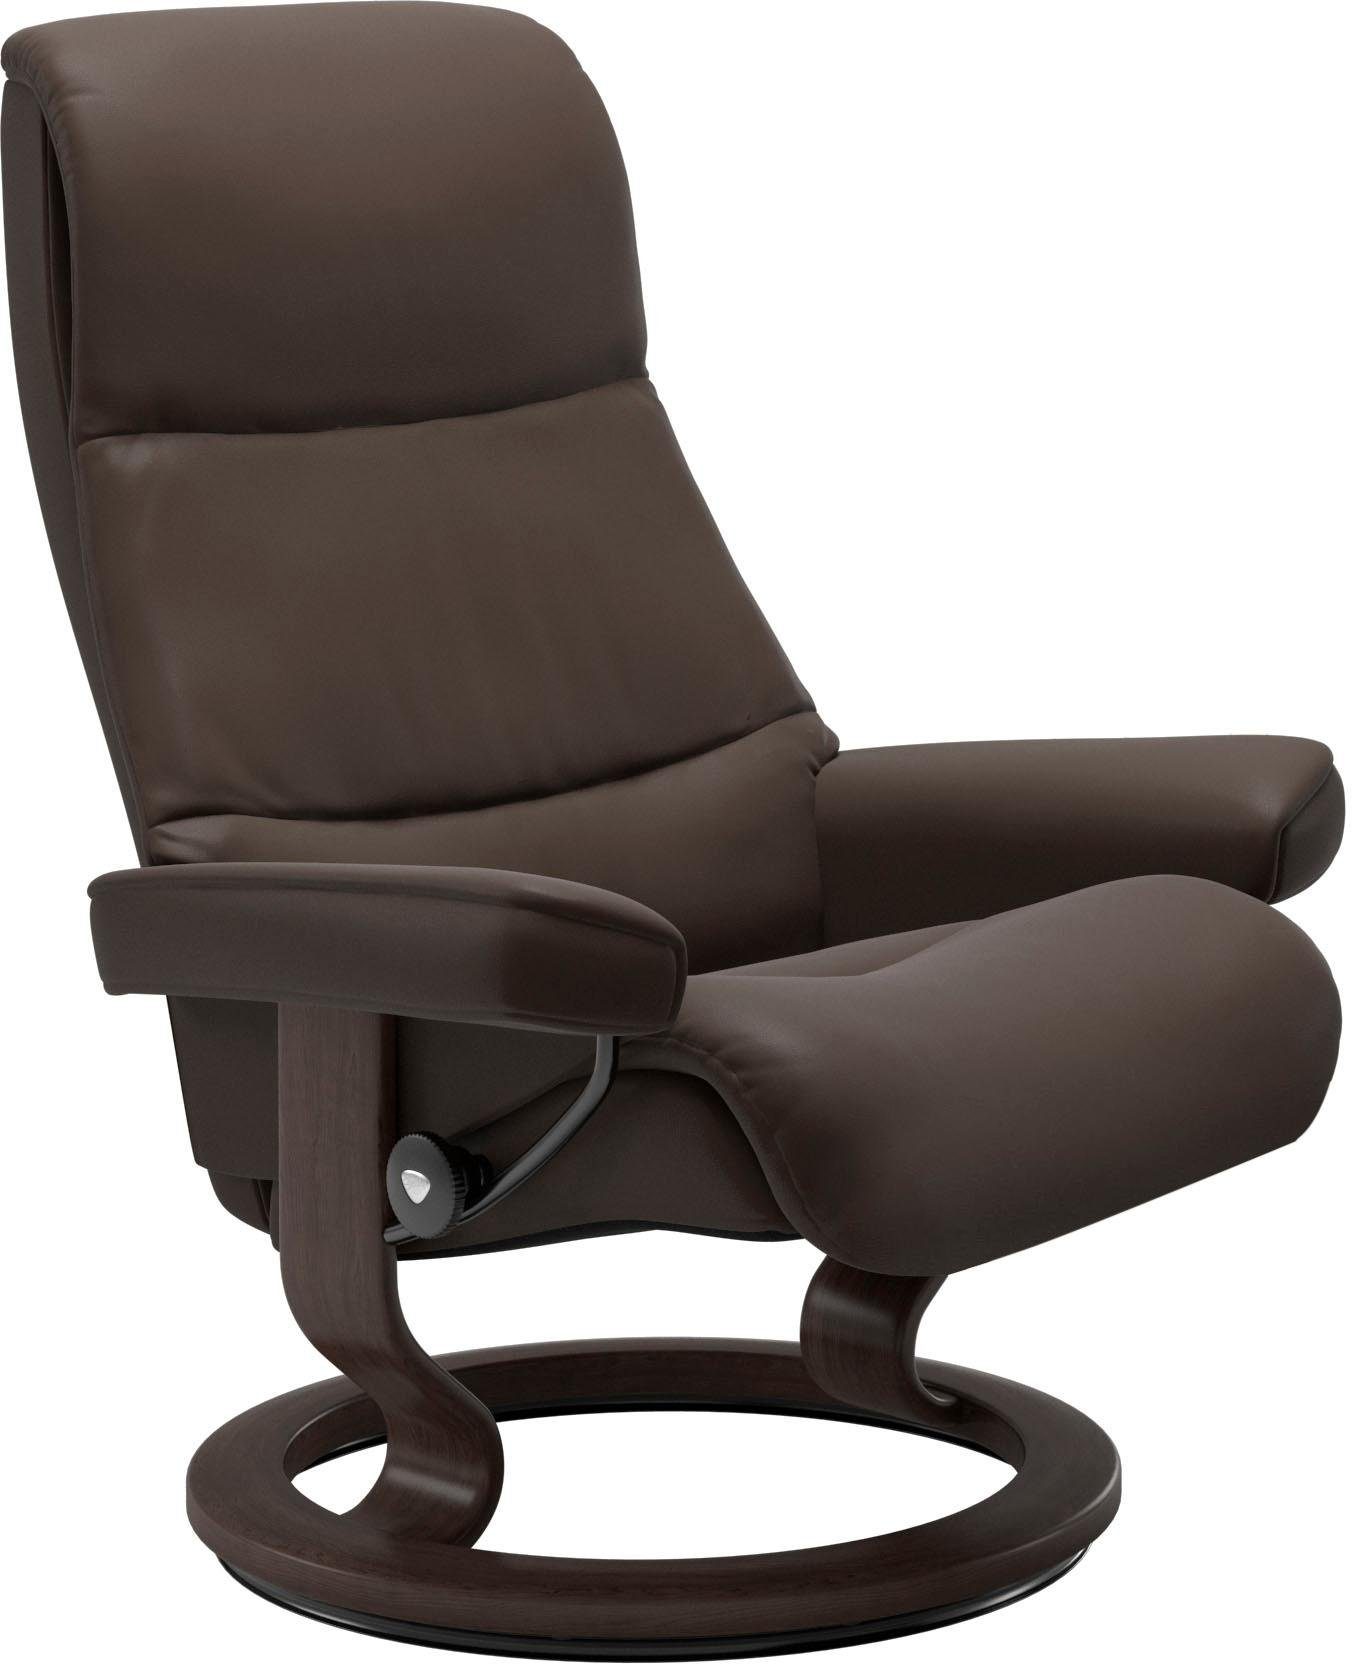 Wenge mit M,Gestell Classic Größe View, Stressless® Base, Relaxsessel